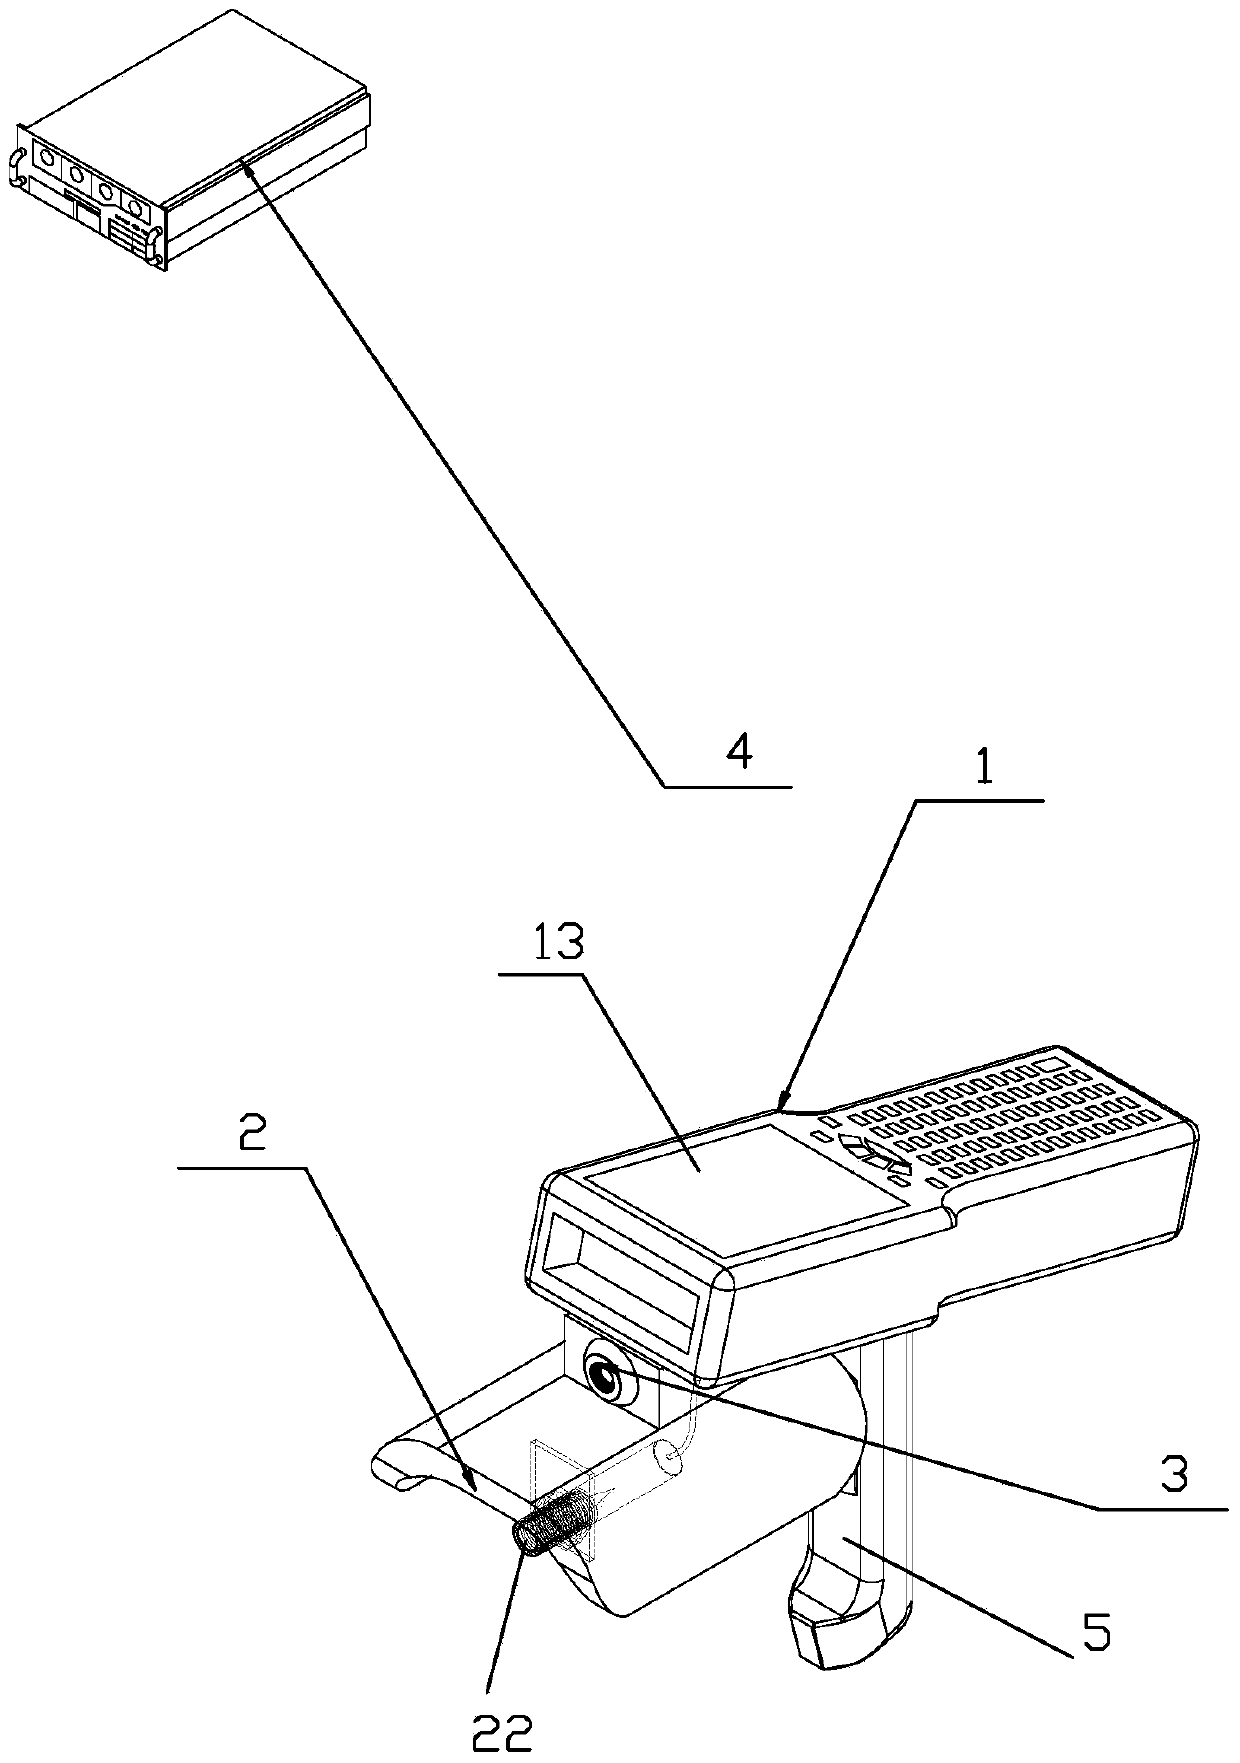 Handheld automatic livestock temperature collecting equipment and method